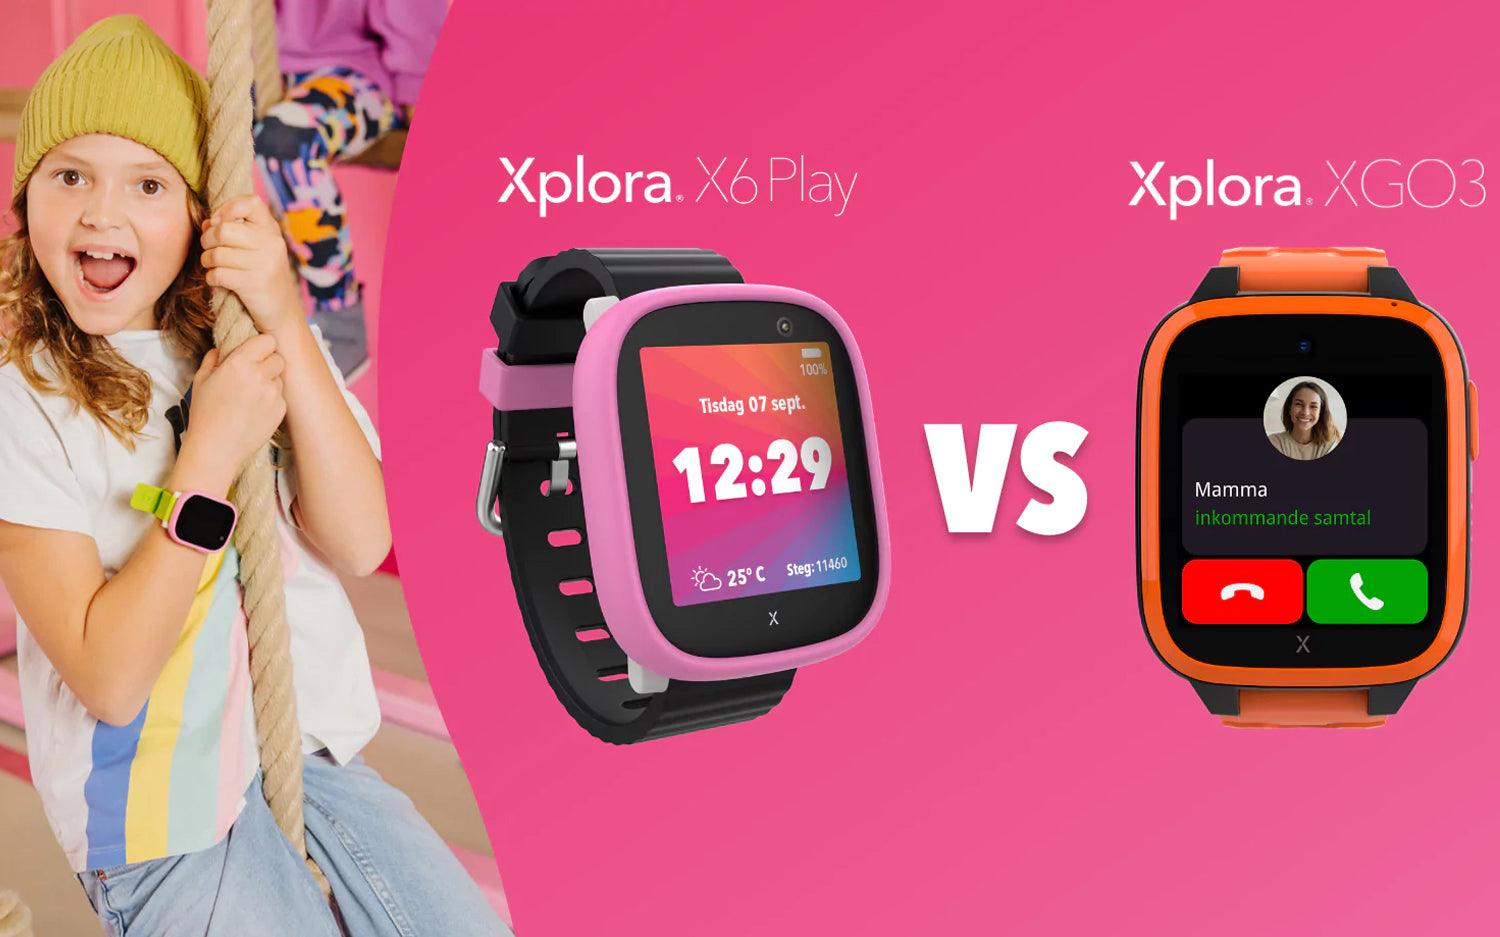 What is the difference between the Xplora-models? – Xplora IE